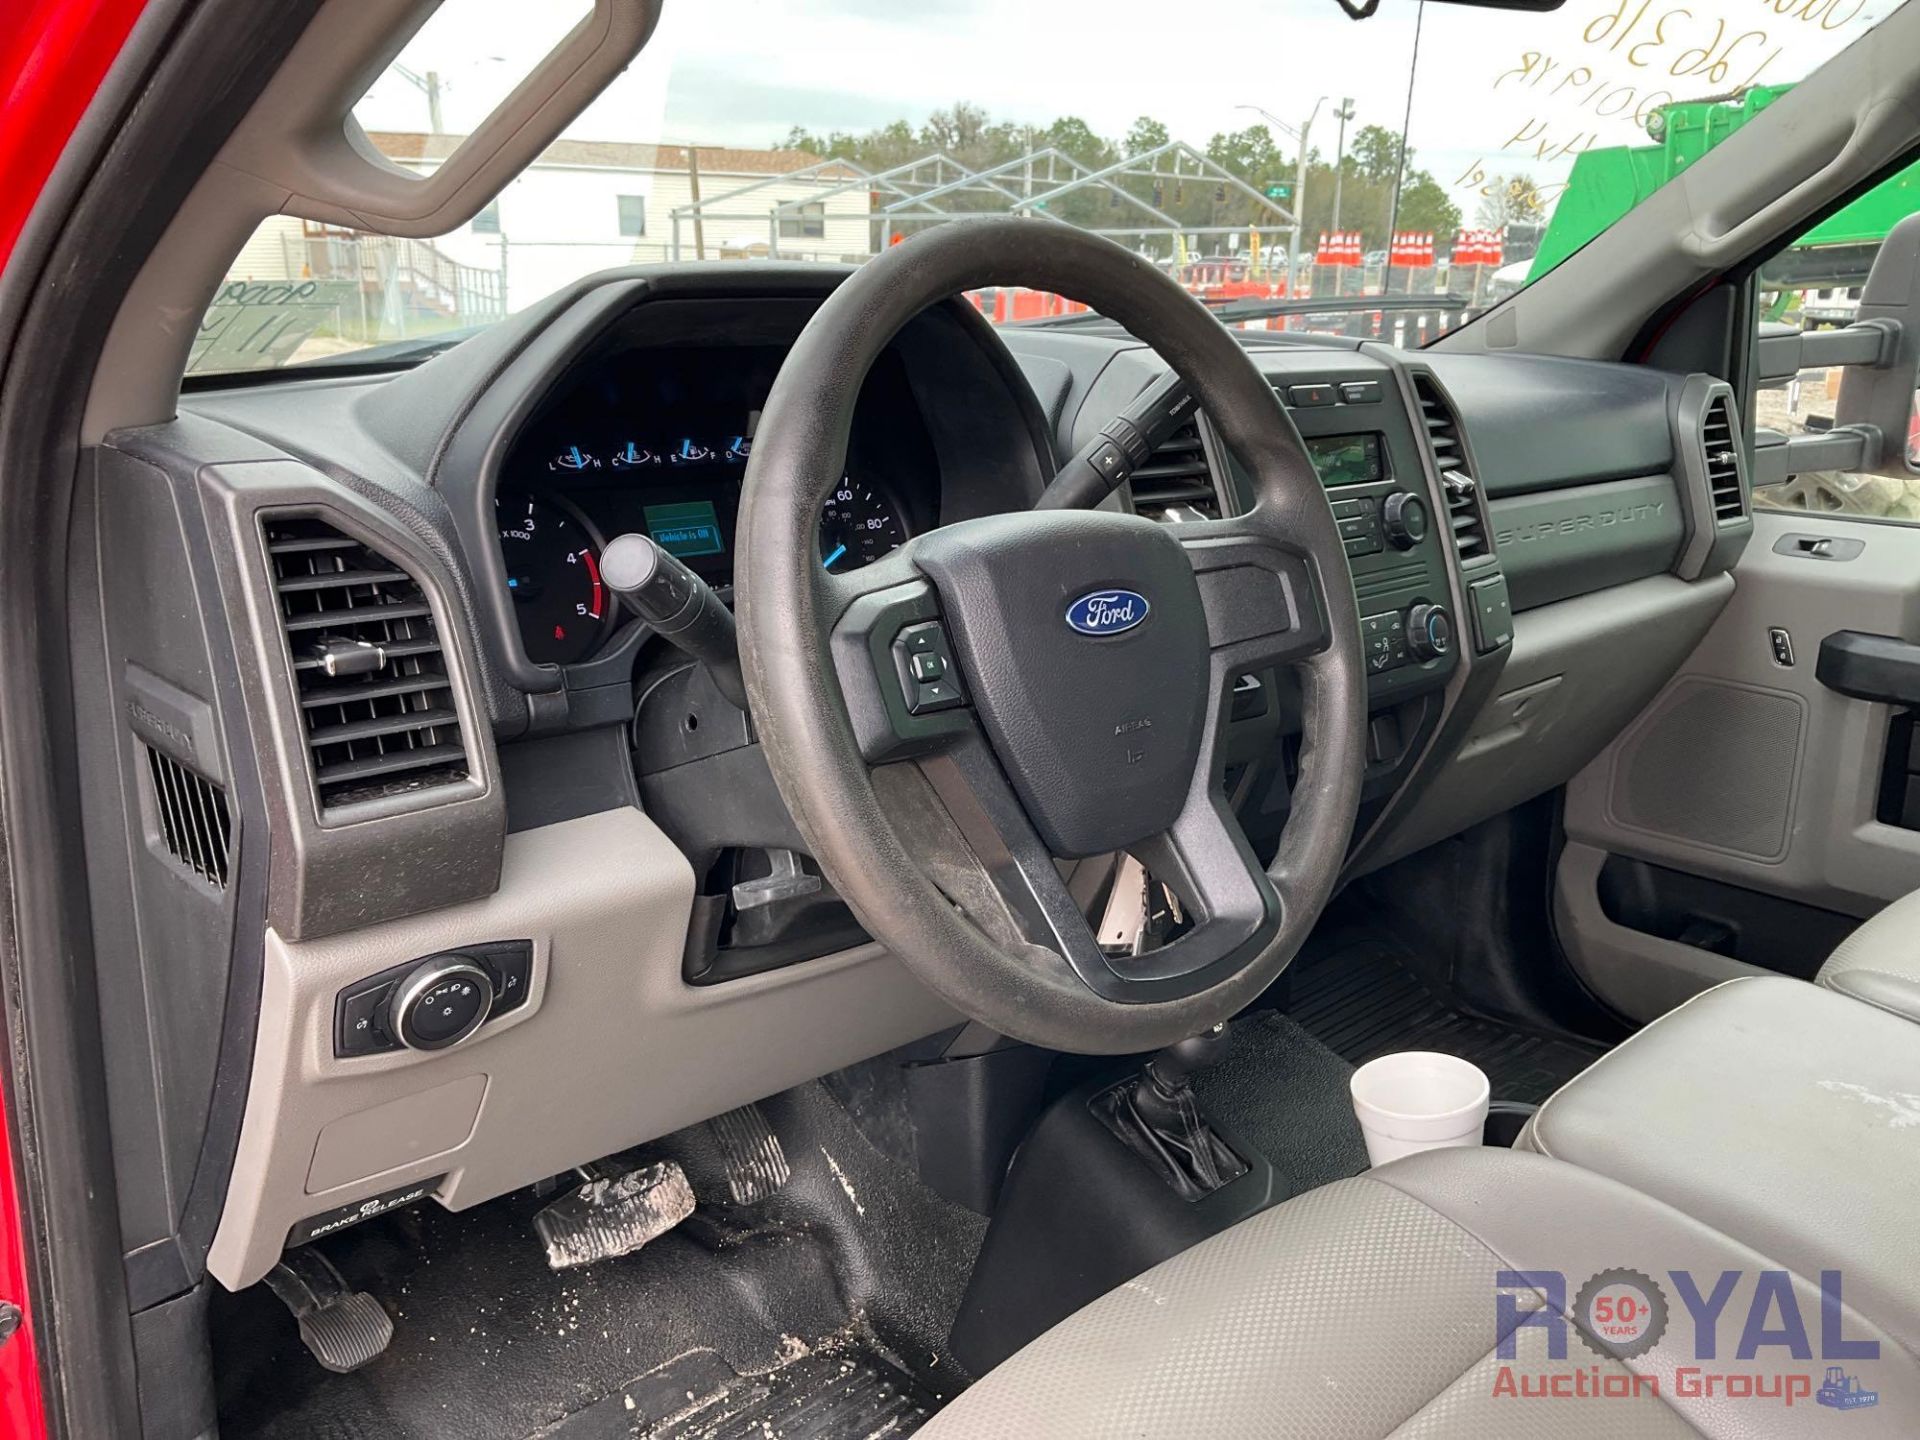 2019 Ford F350 4x4 Service Truck - Image 21 of 30